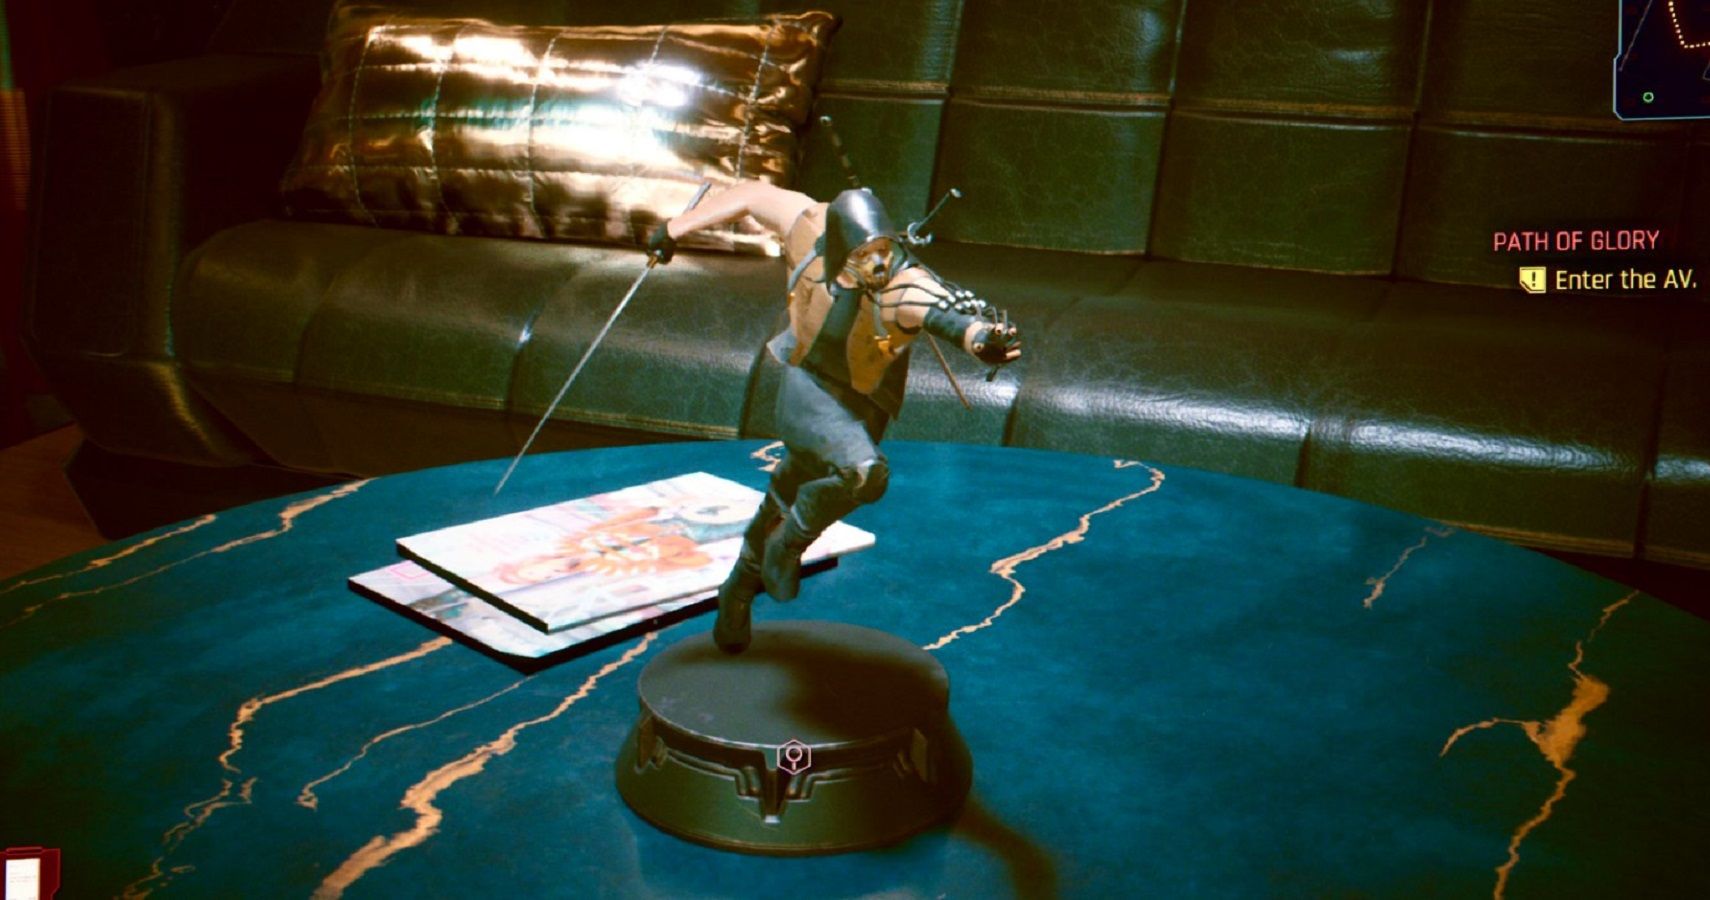 Statue of the yellow jacket warrior from the KO Kombat series in Cyberpunk 2077.